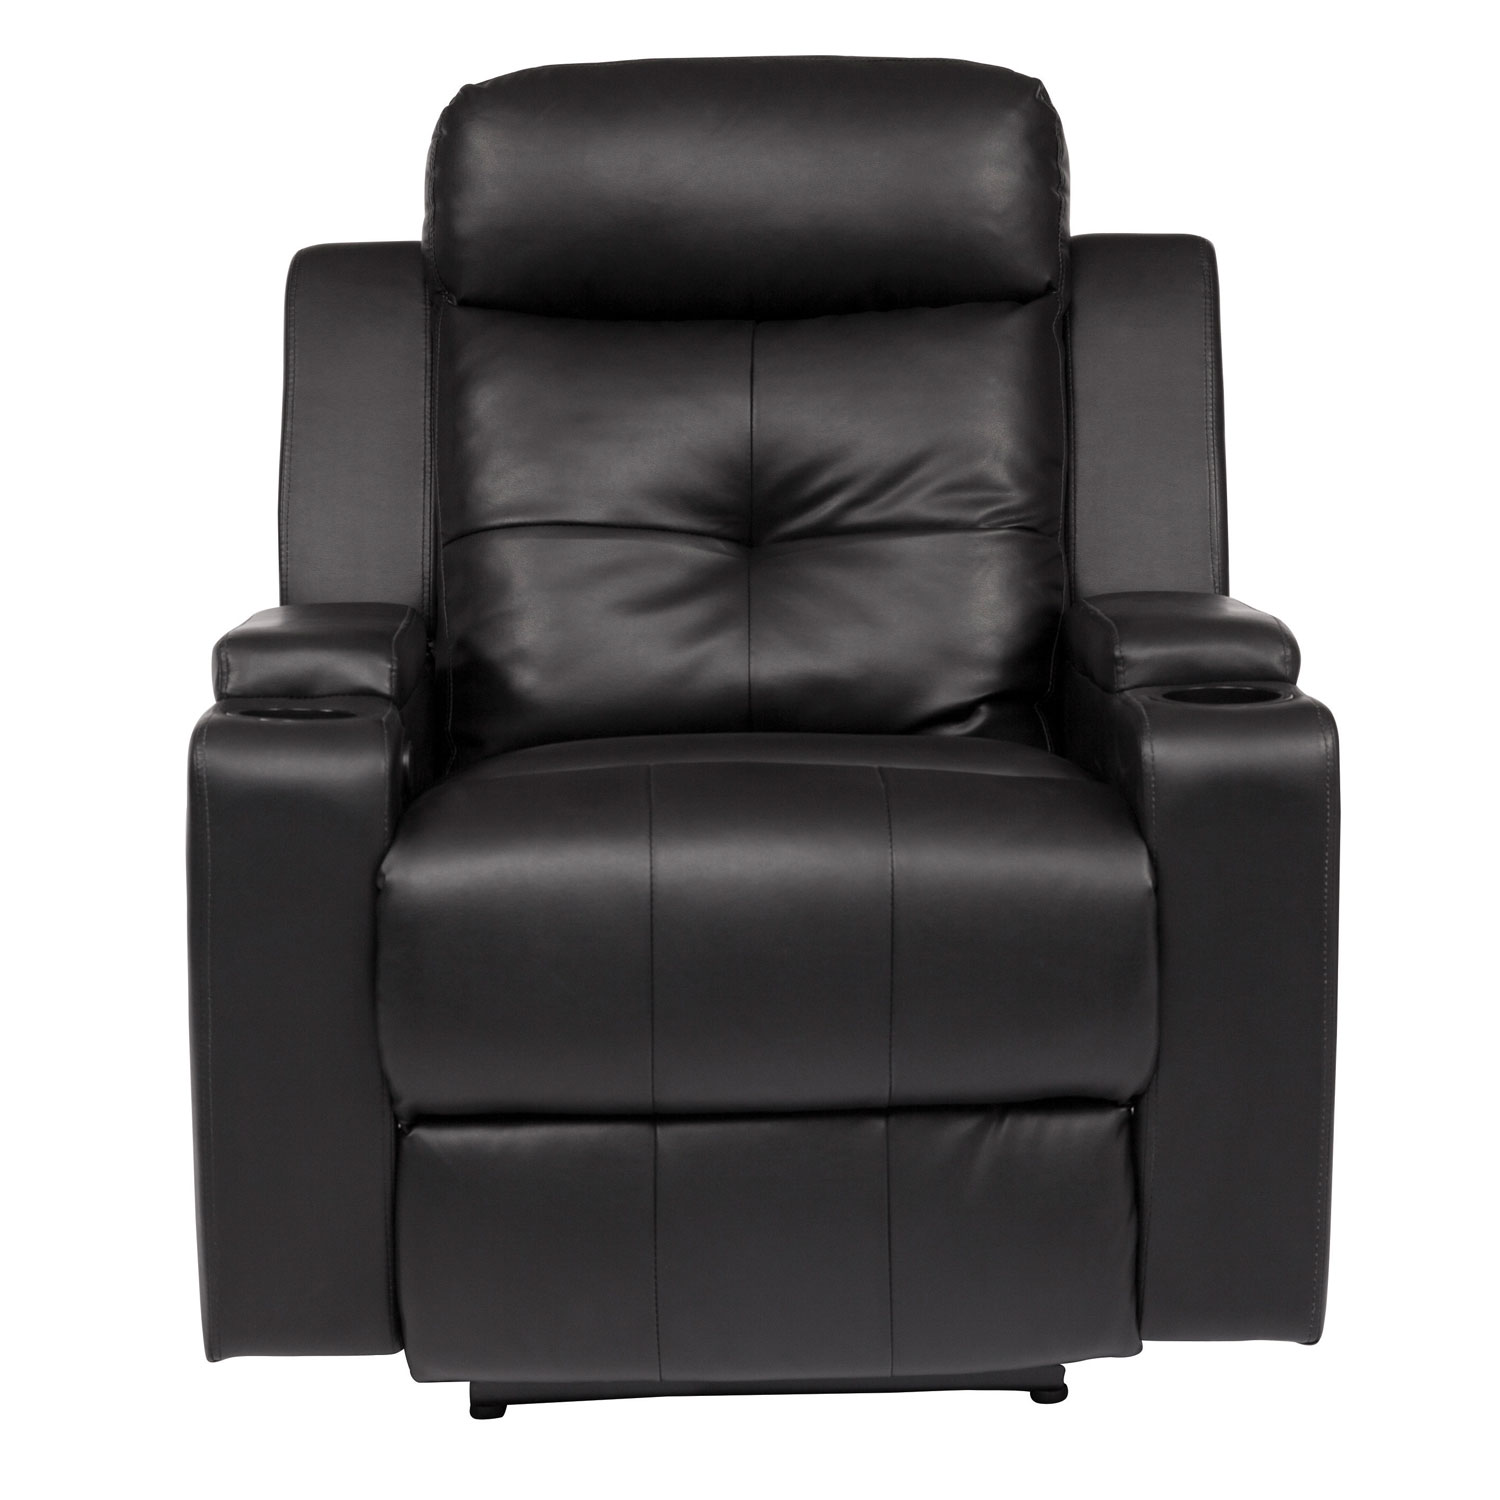 Broadway 3 Seat Bonded Leather Power Recliner Home Theatre Seating